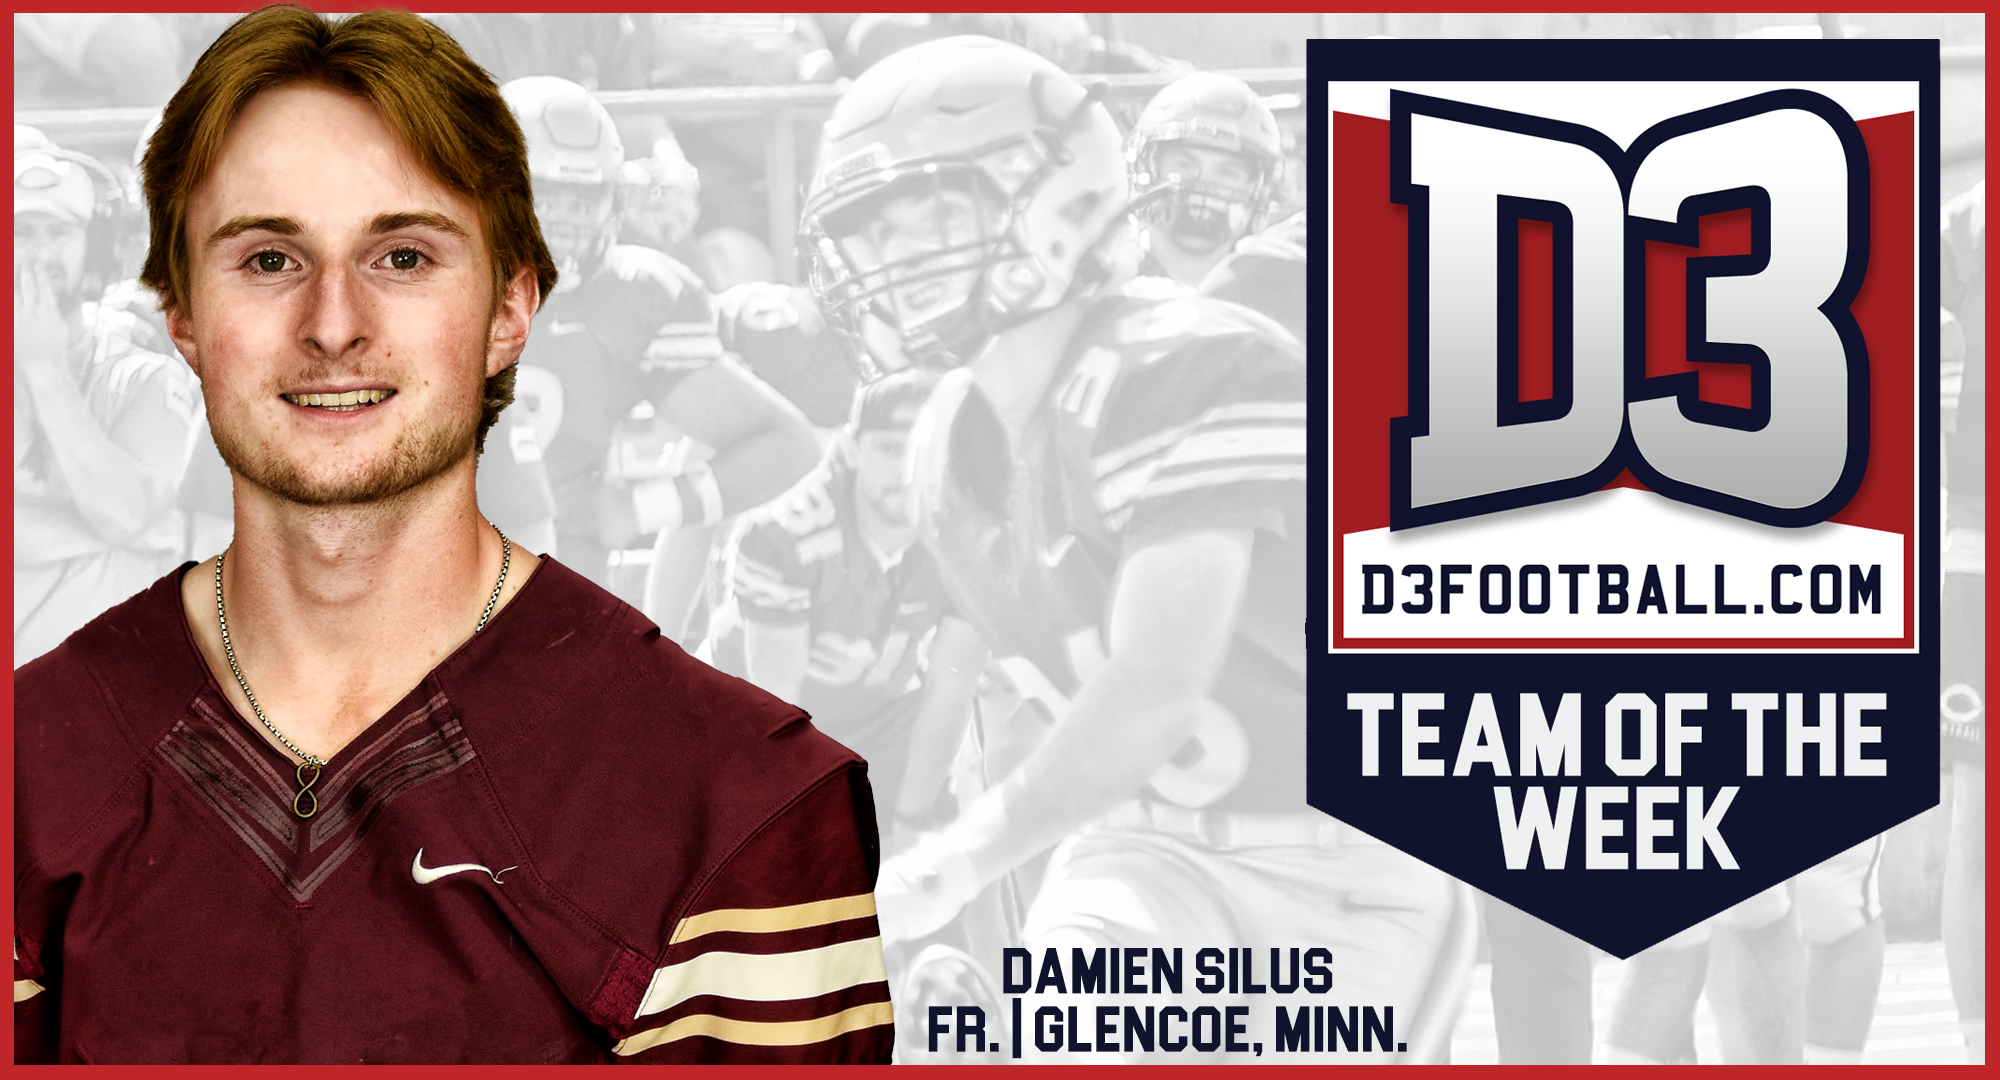 Damien Silus followed up his MIAC Special Teams Player of the Week award by being named to the D3football.com National Team of the Week.